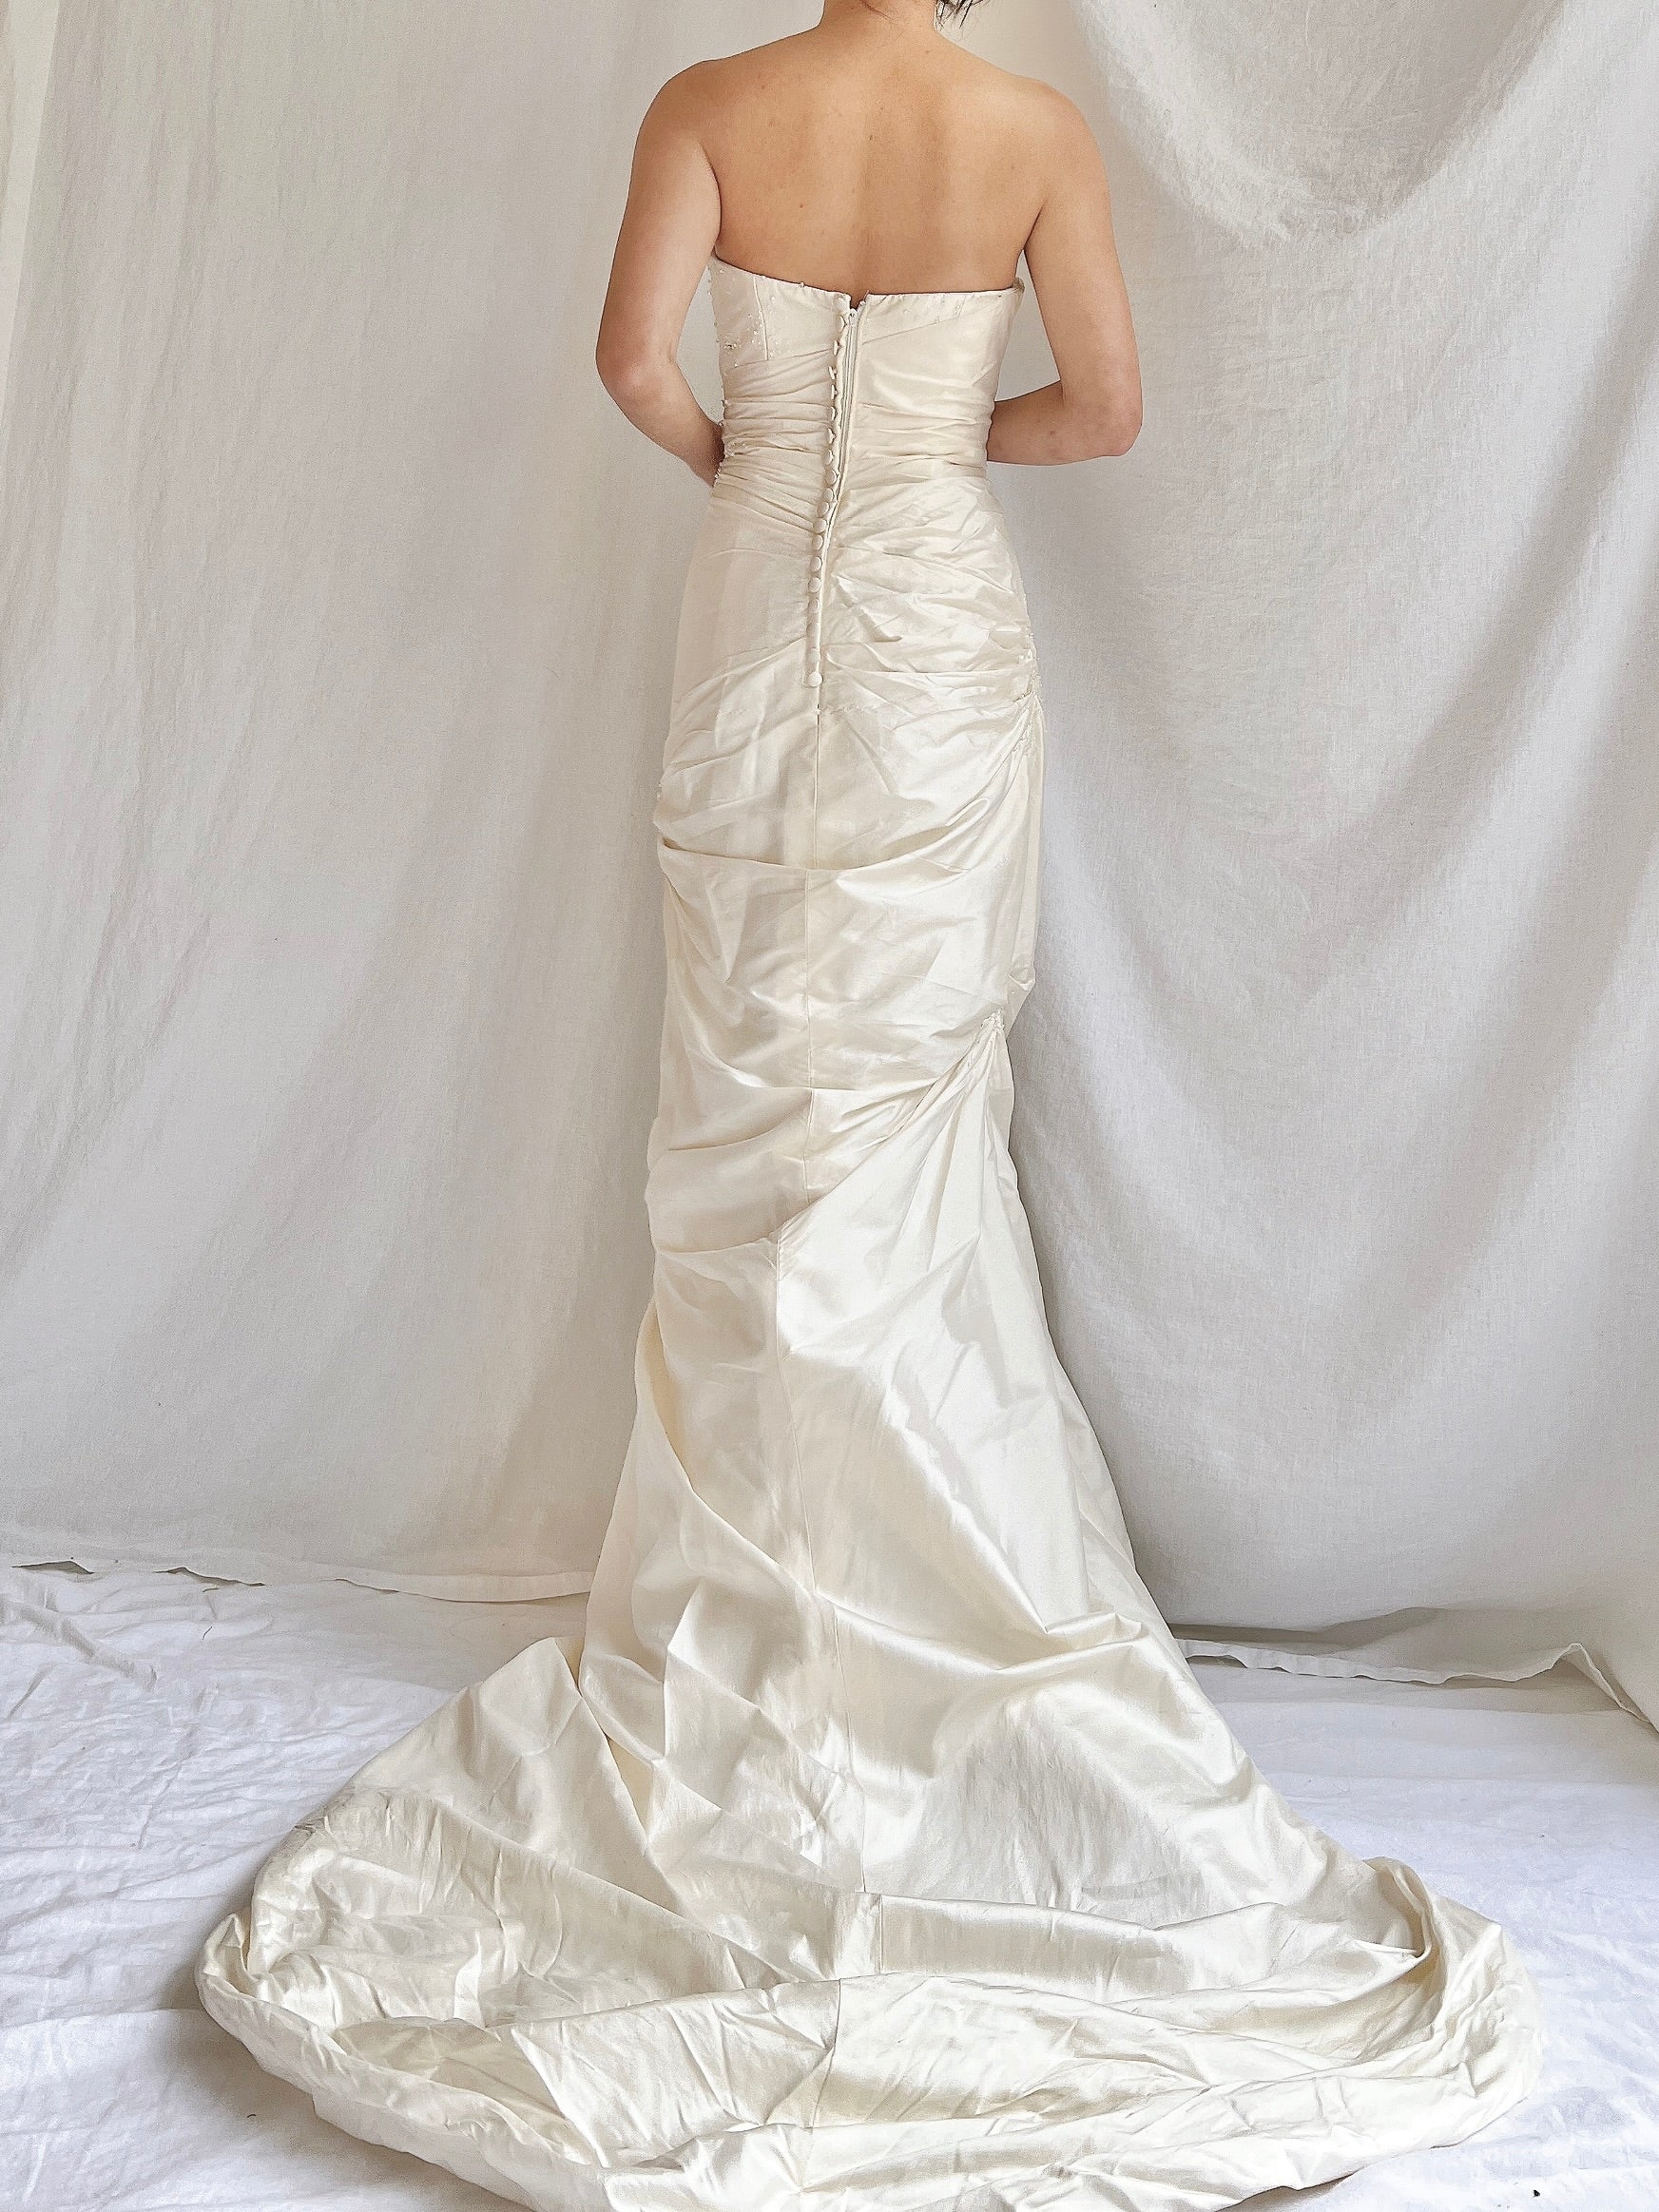 Vintage Silk Draped Gown - S/4